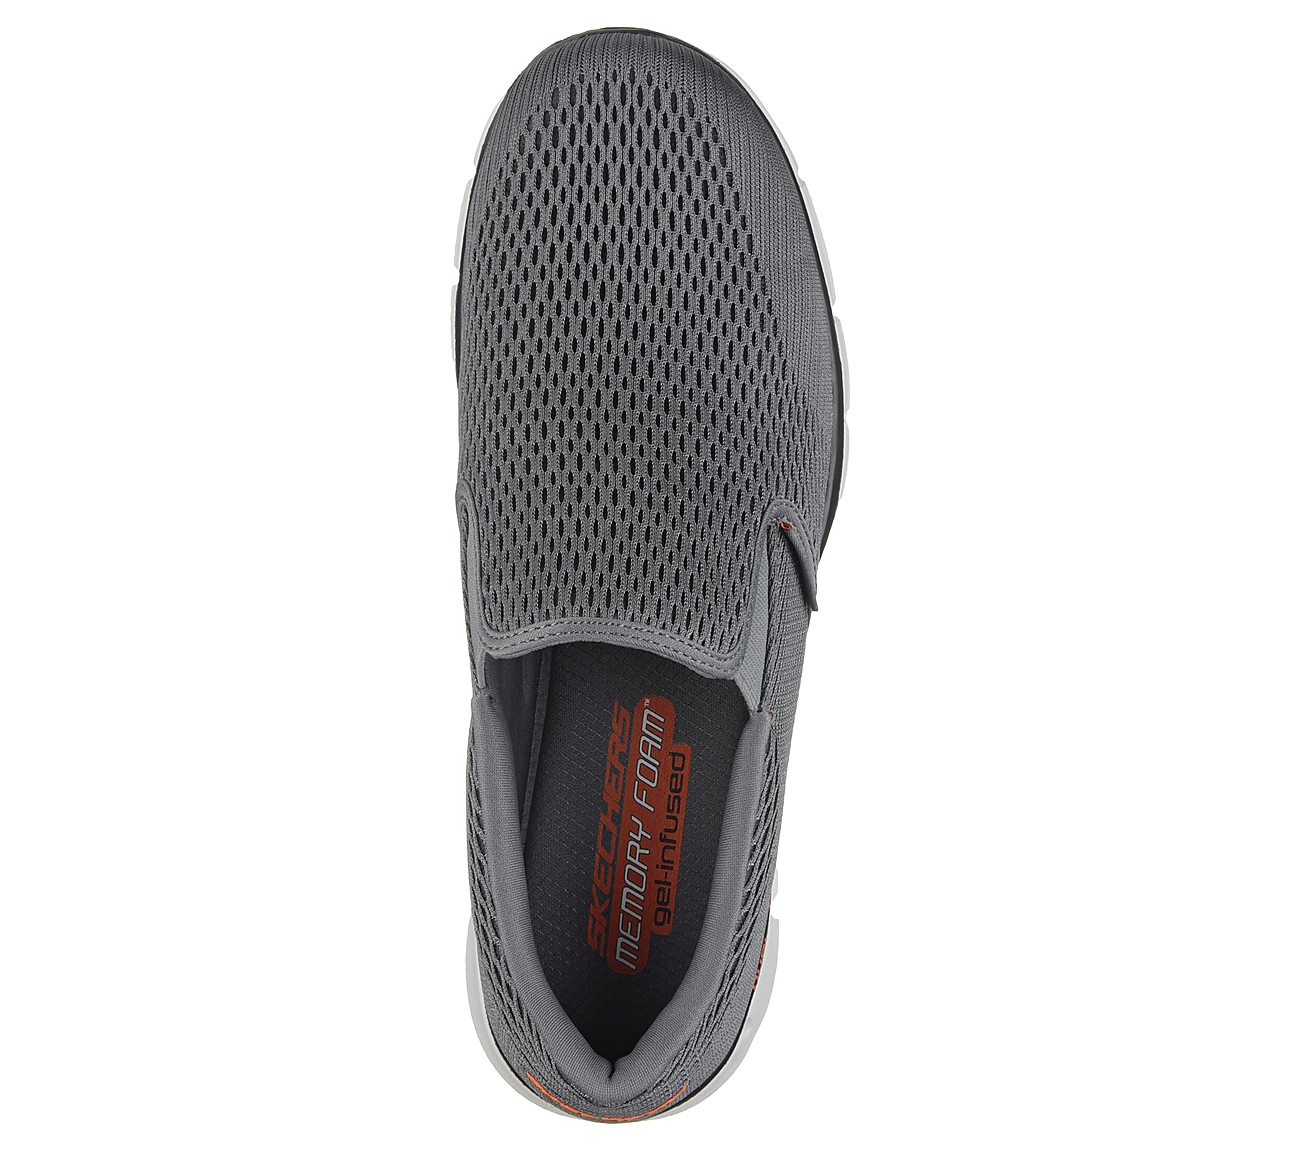 EQUALIZER- DOUBLE PLAY, CHARCOAL/ORANGE Footwear Top View